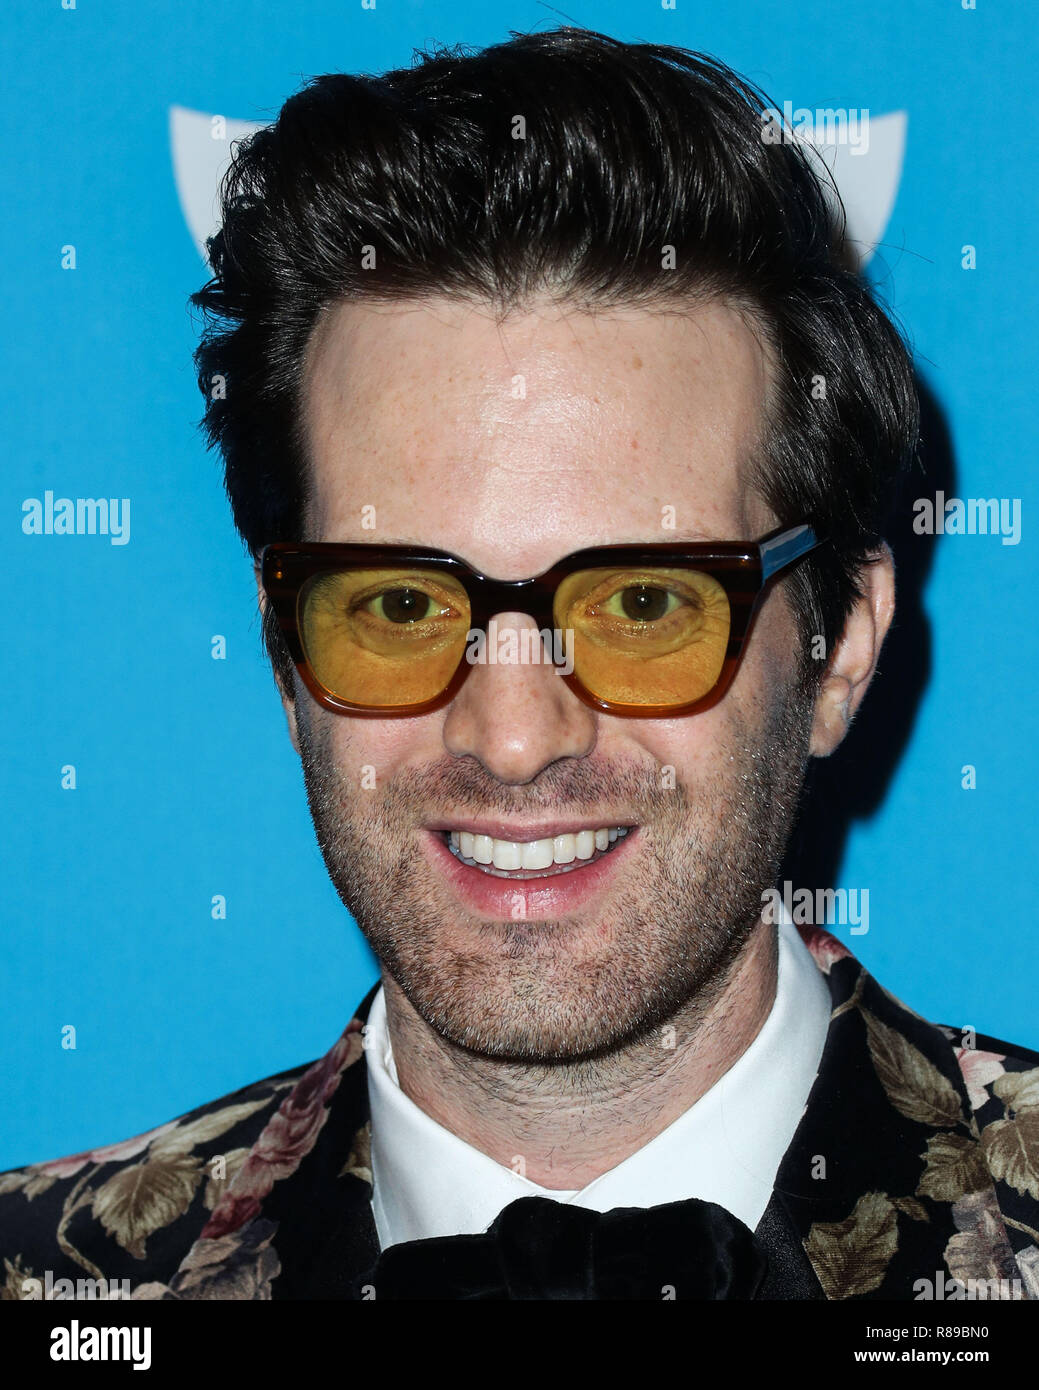 LOS ANGELES, CA, USA - OCTOBER 25: Mayer Hawthorne at the Sixth Annual UNICEF Masquerade Ball held at Clifton's Republic on October 25, 2018 in Los Angeles, California, United States. (Photo by Xavier Collin/Image Press Agency) Stock Photo